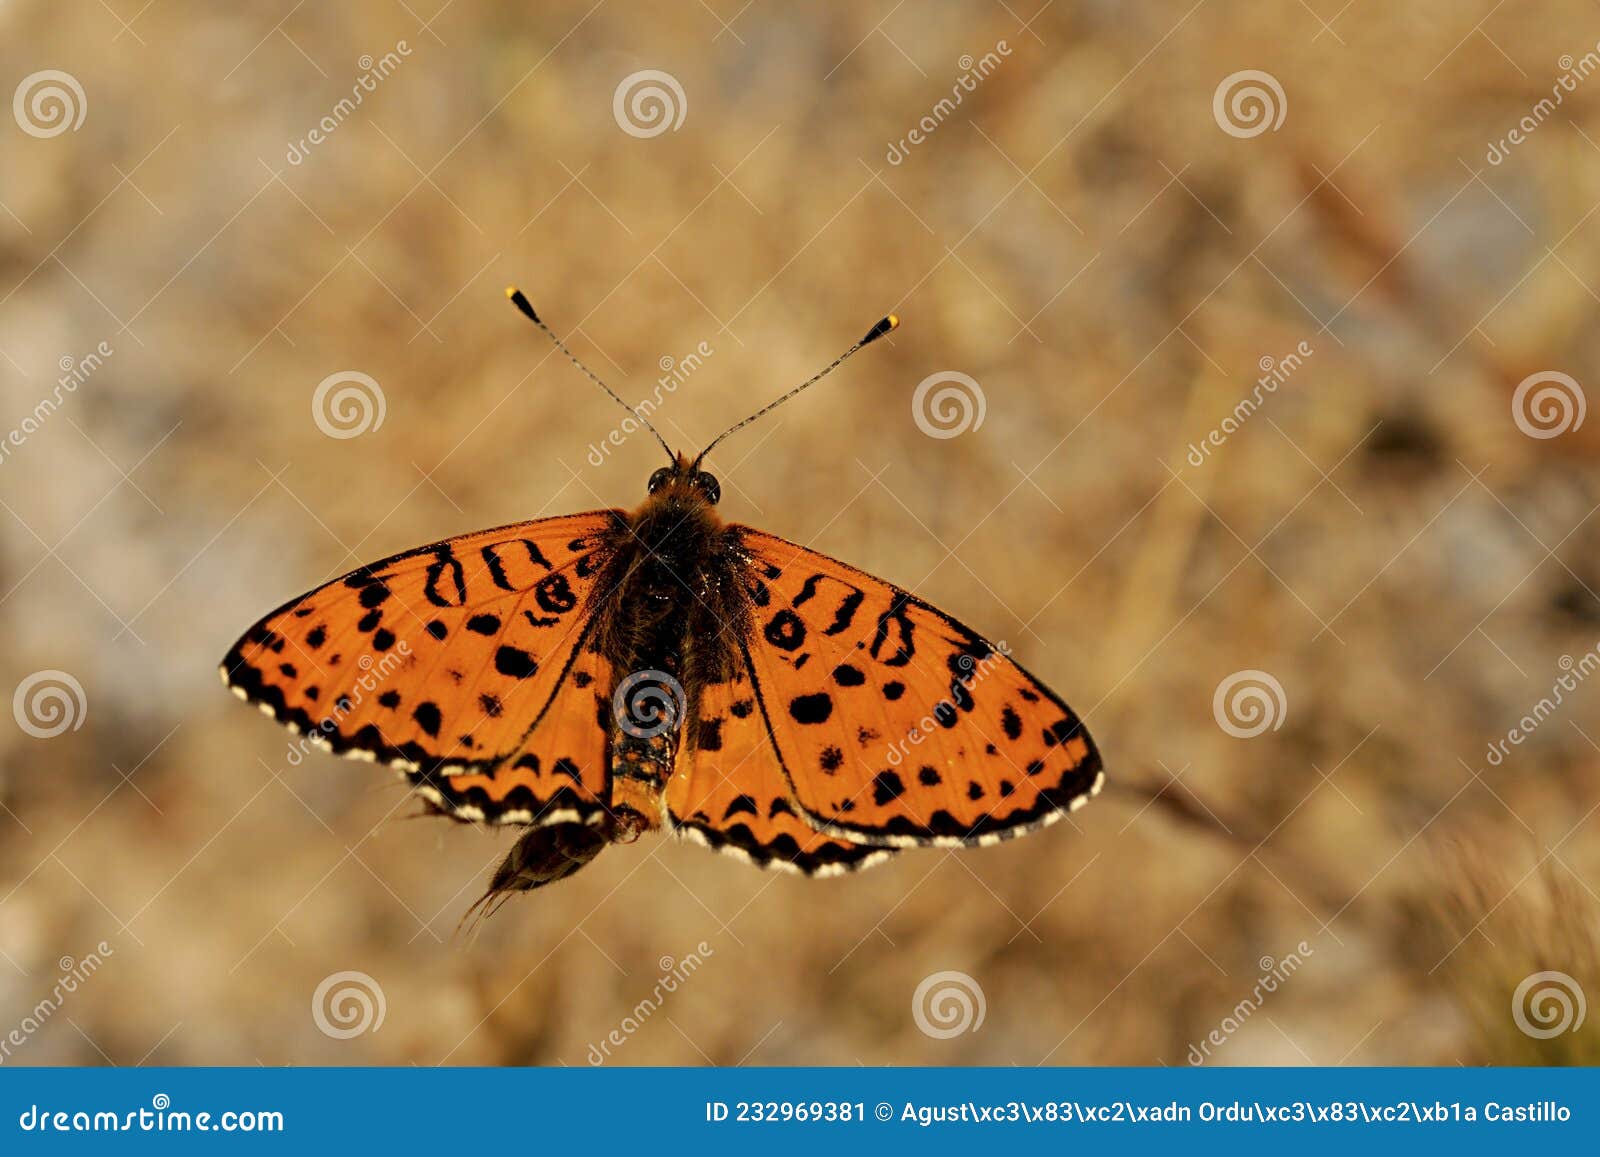 day butterfly perched on flower, melitaea didyma